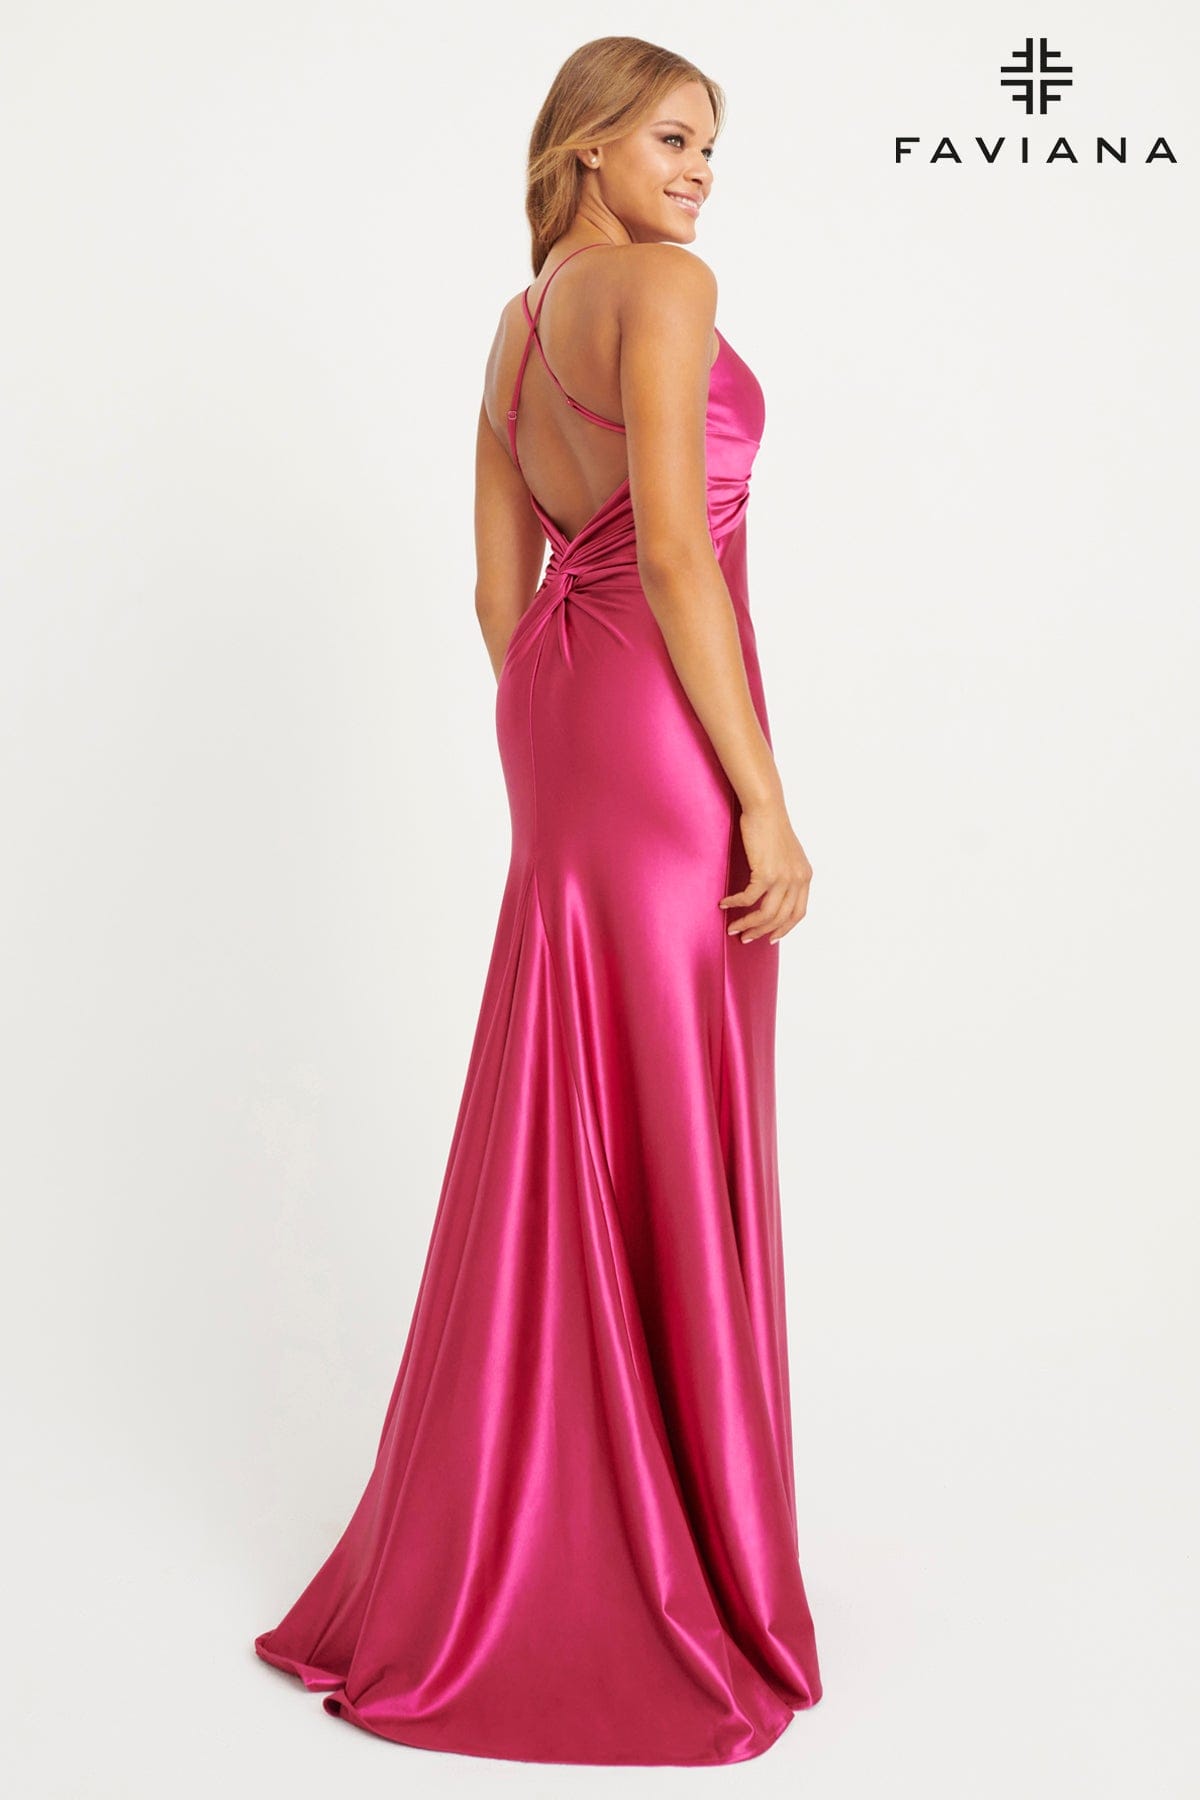 Sleek Satin Long Dress For Prom With Knot Bustier | 11034